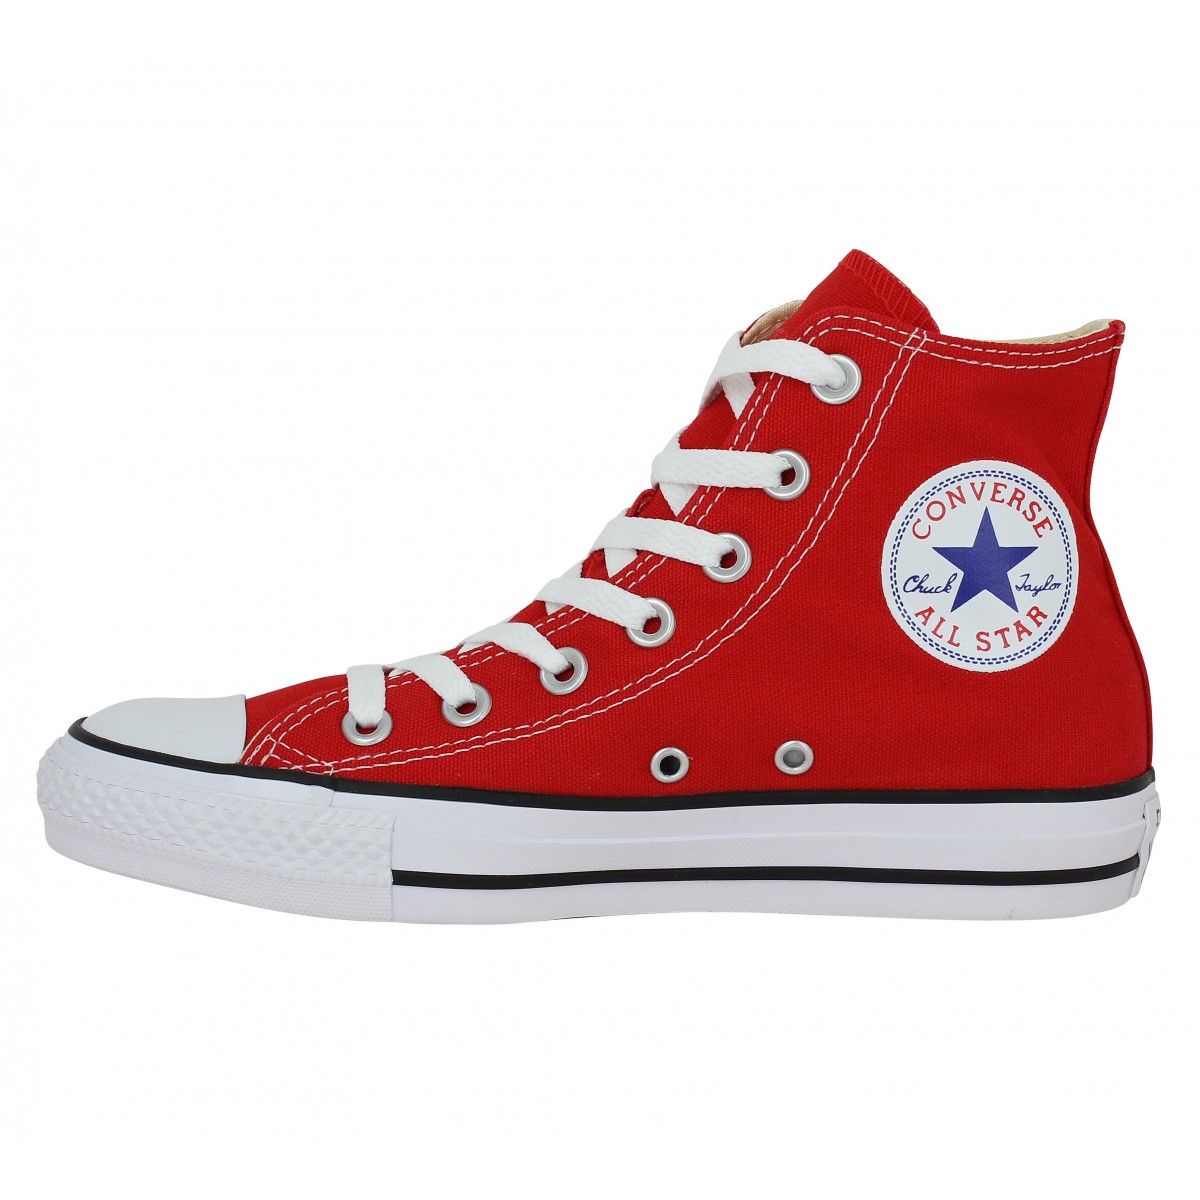 CONVERSE Chuck Taylor All Star Hi toile Femme Rouge